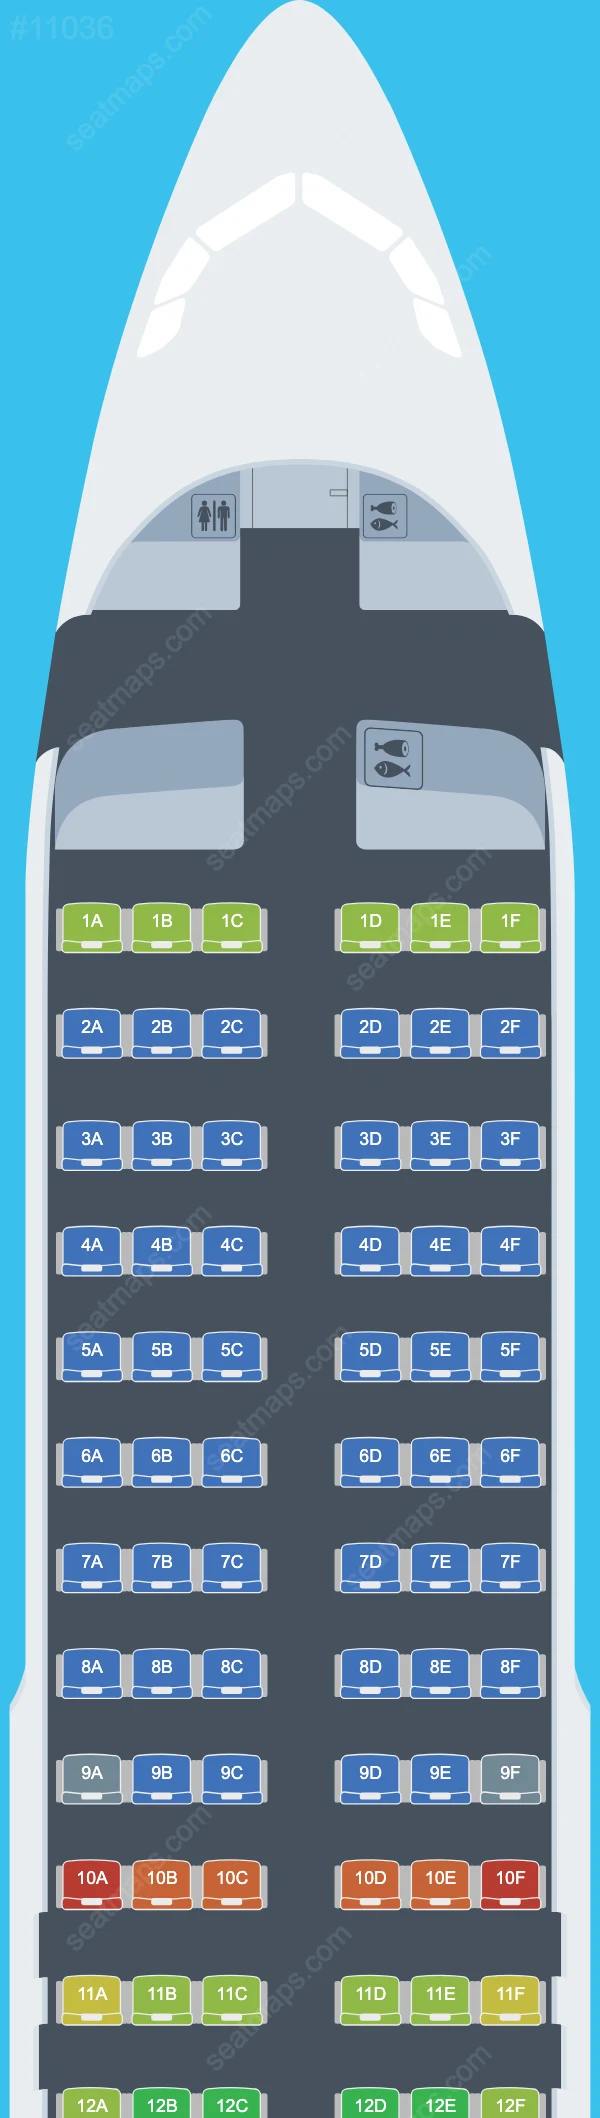 Scandinavian Airlines Connect Airbus A320 Seat Maps A320-200neo